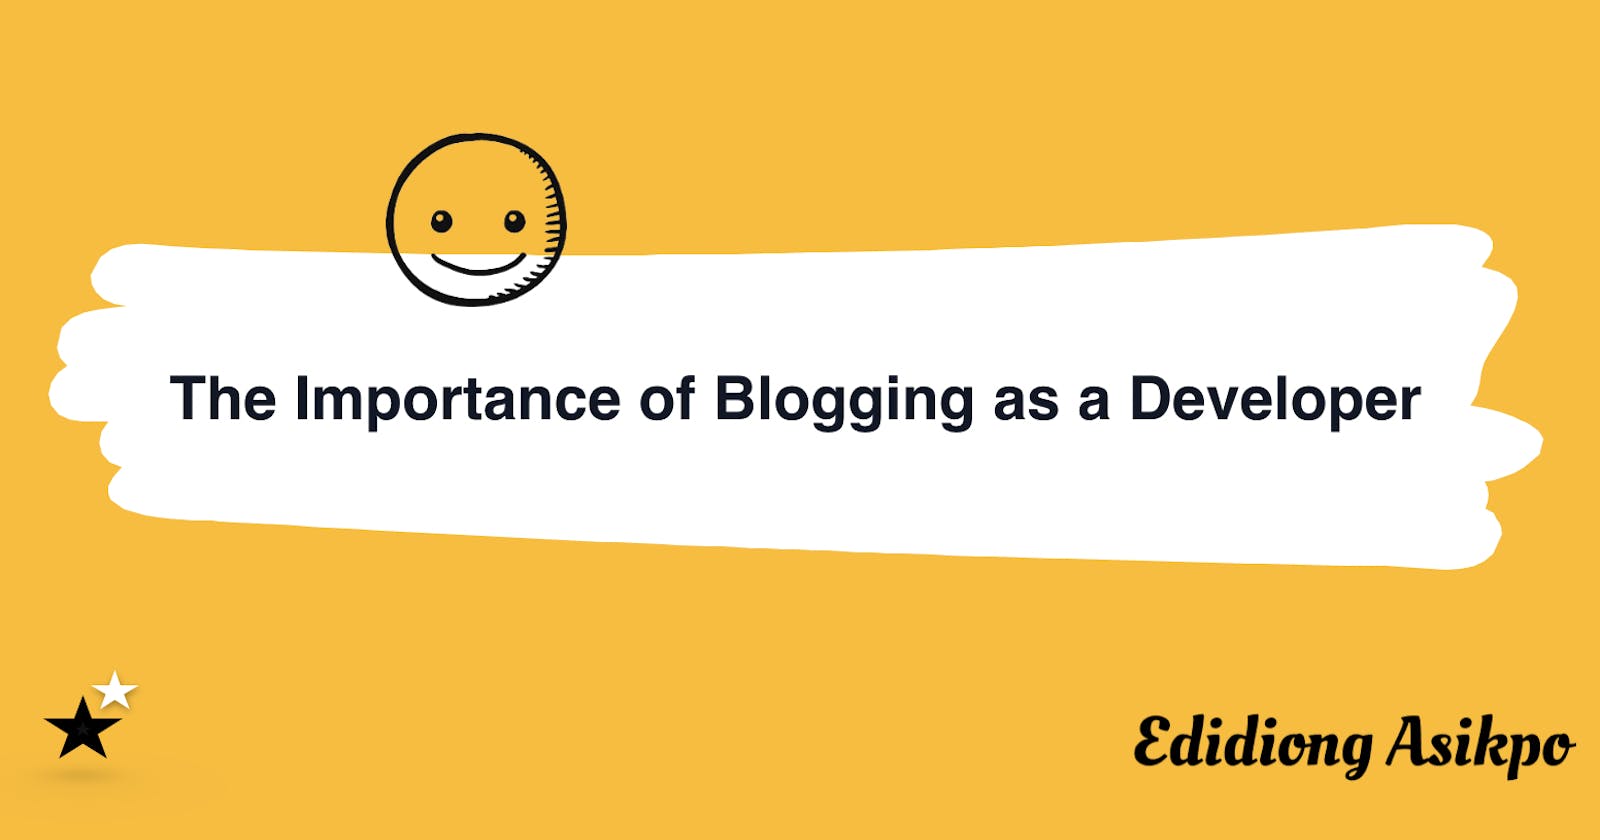 The Importance of Blogging as a Developer